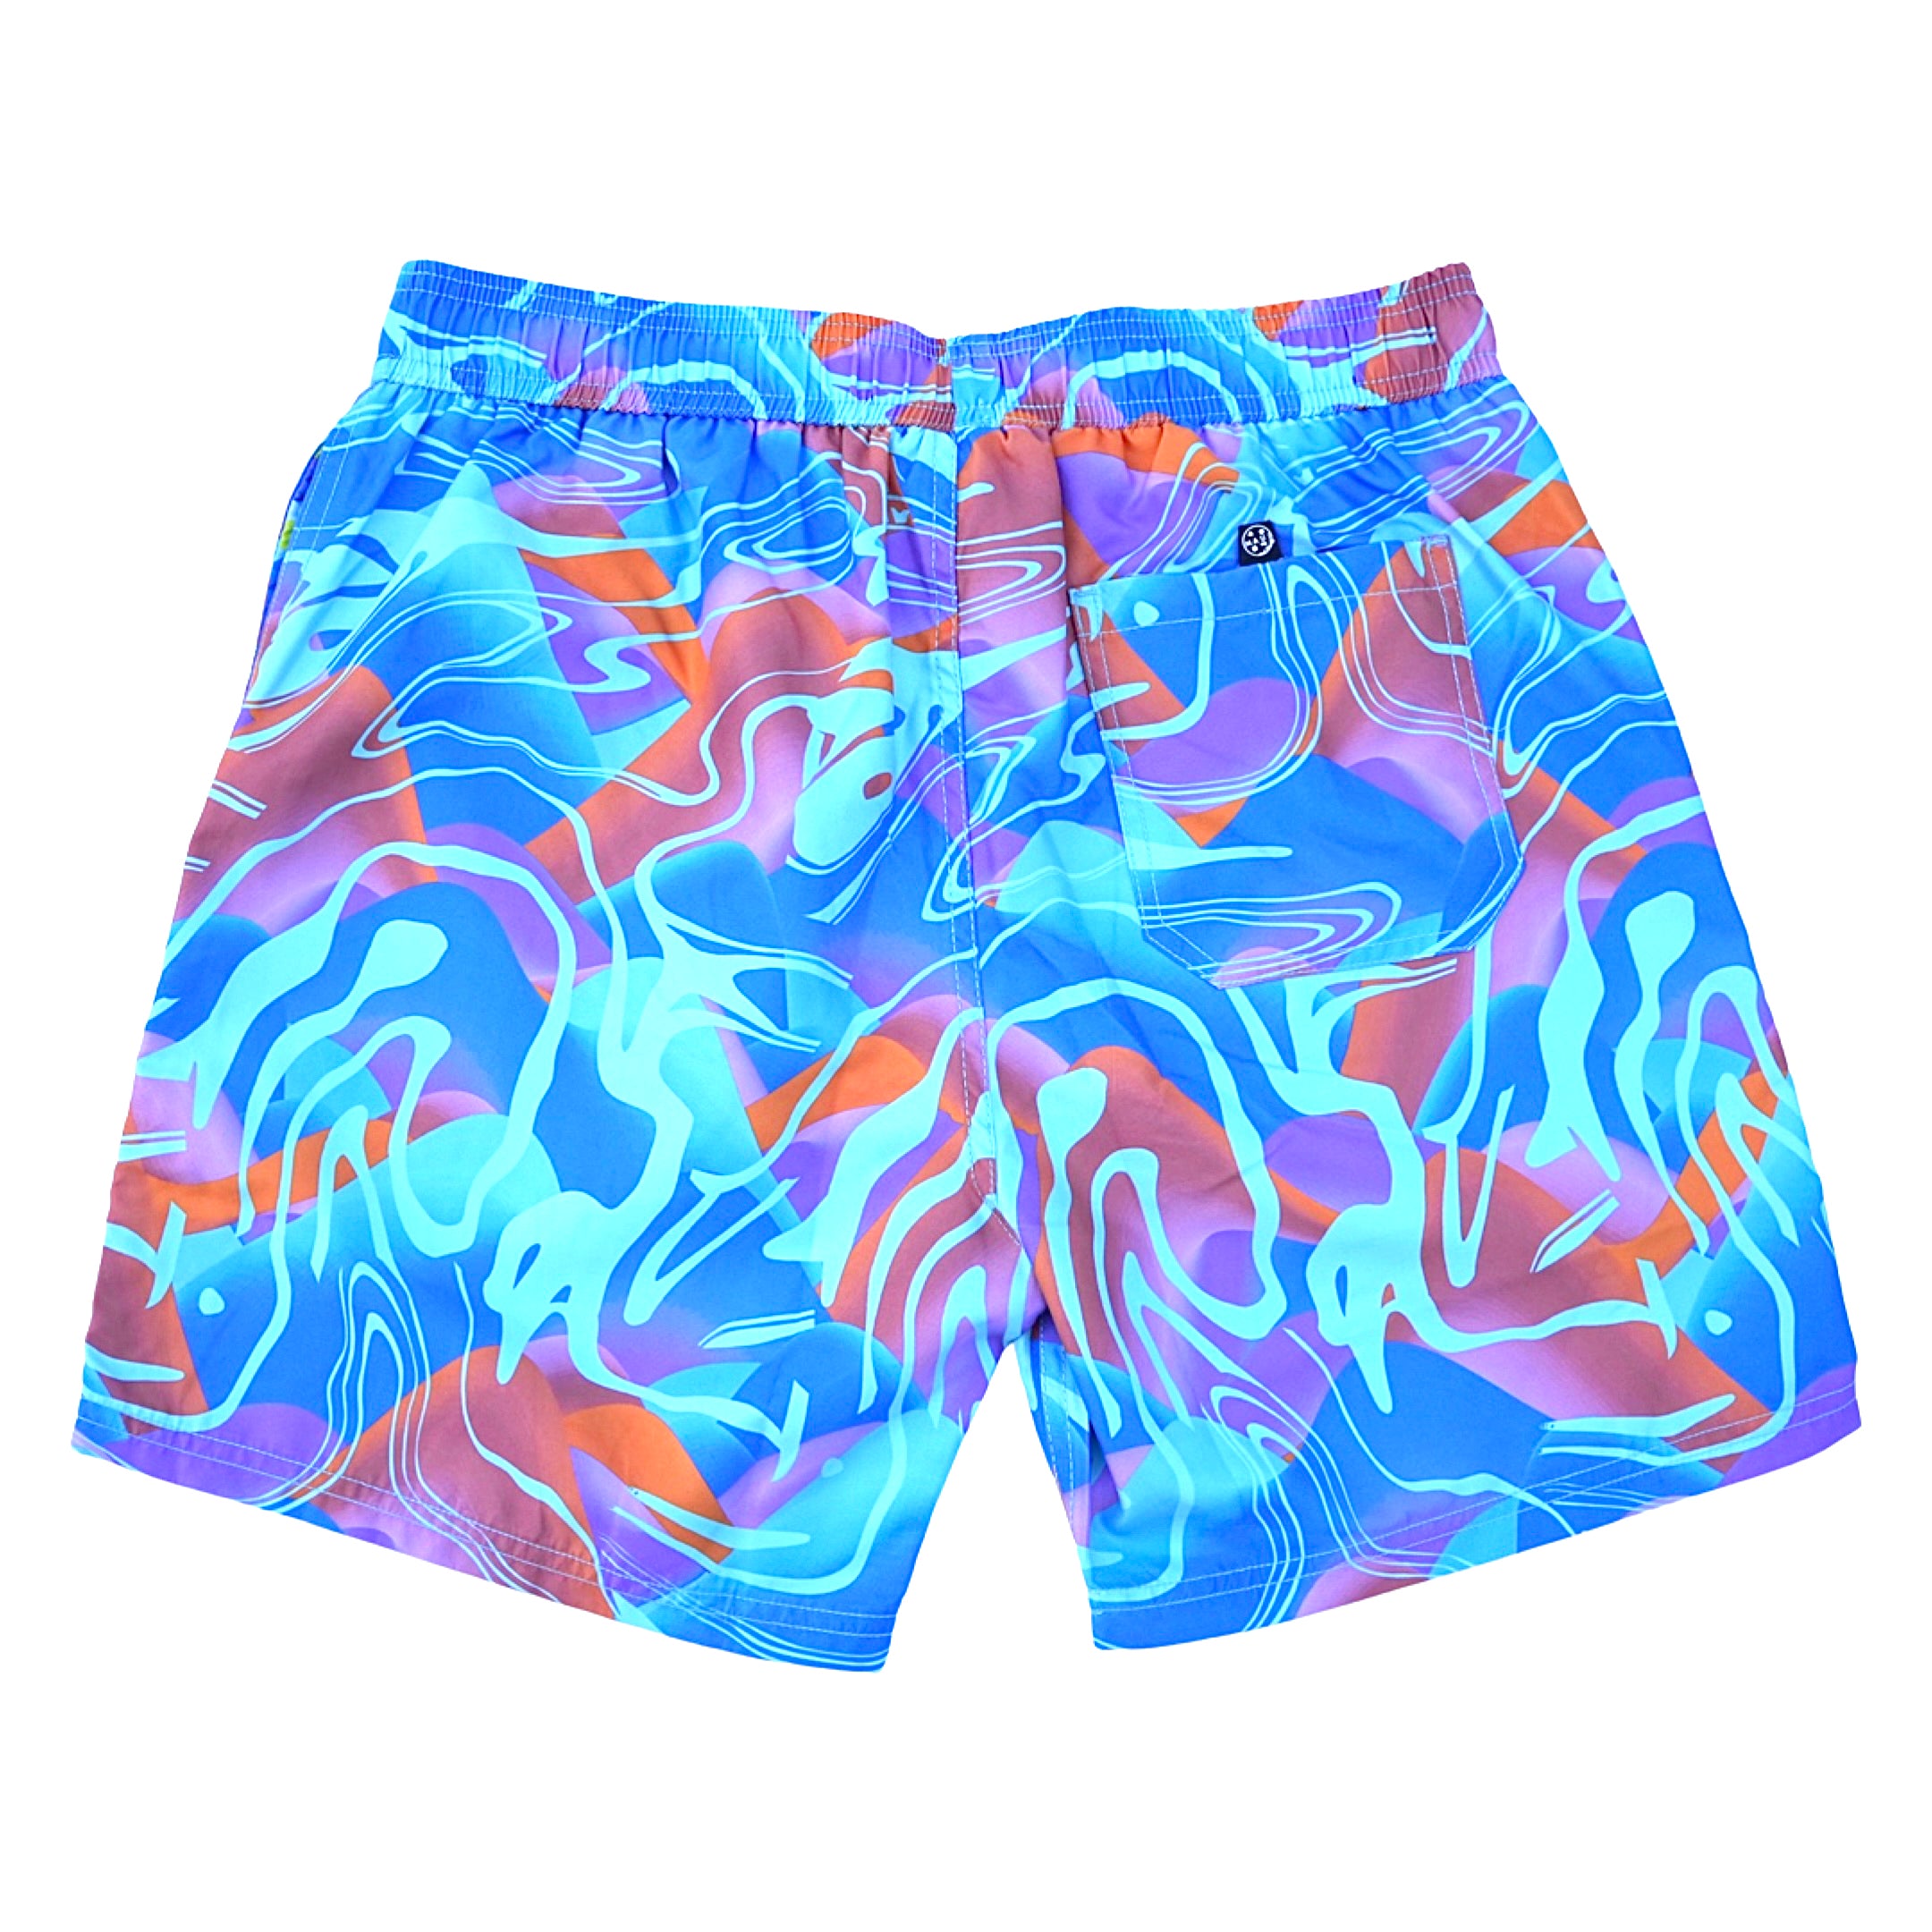 Psychedelic Pool Shorts in Yellow